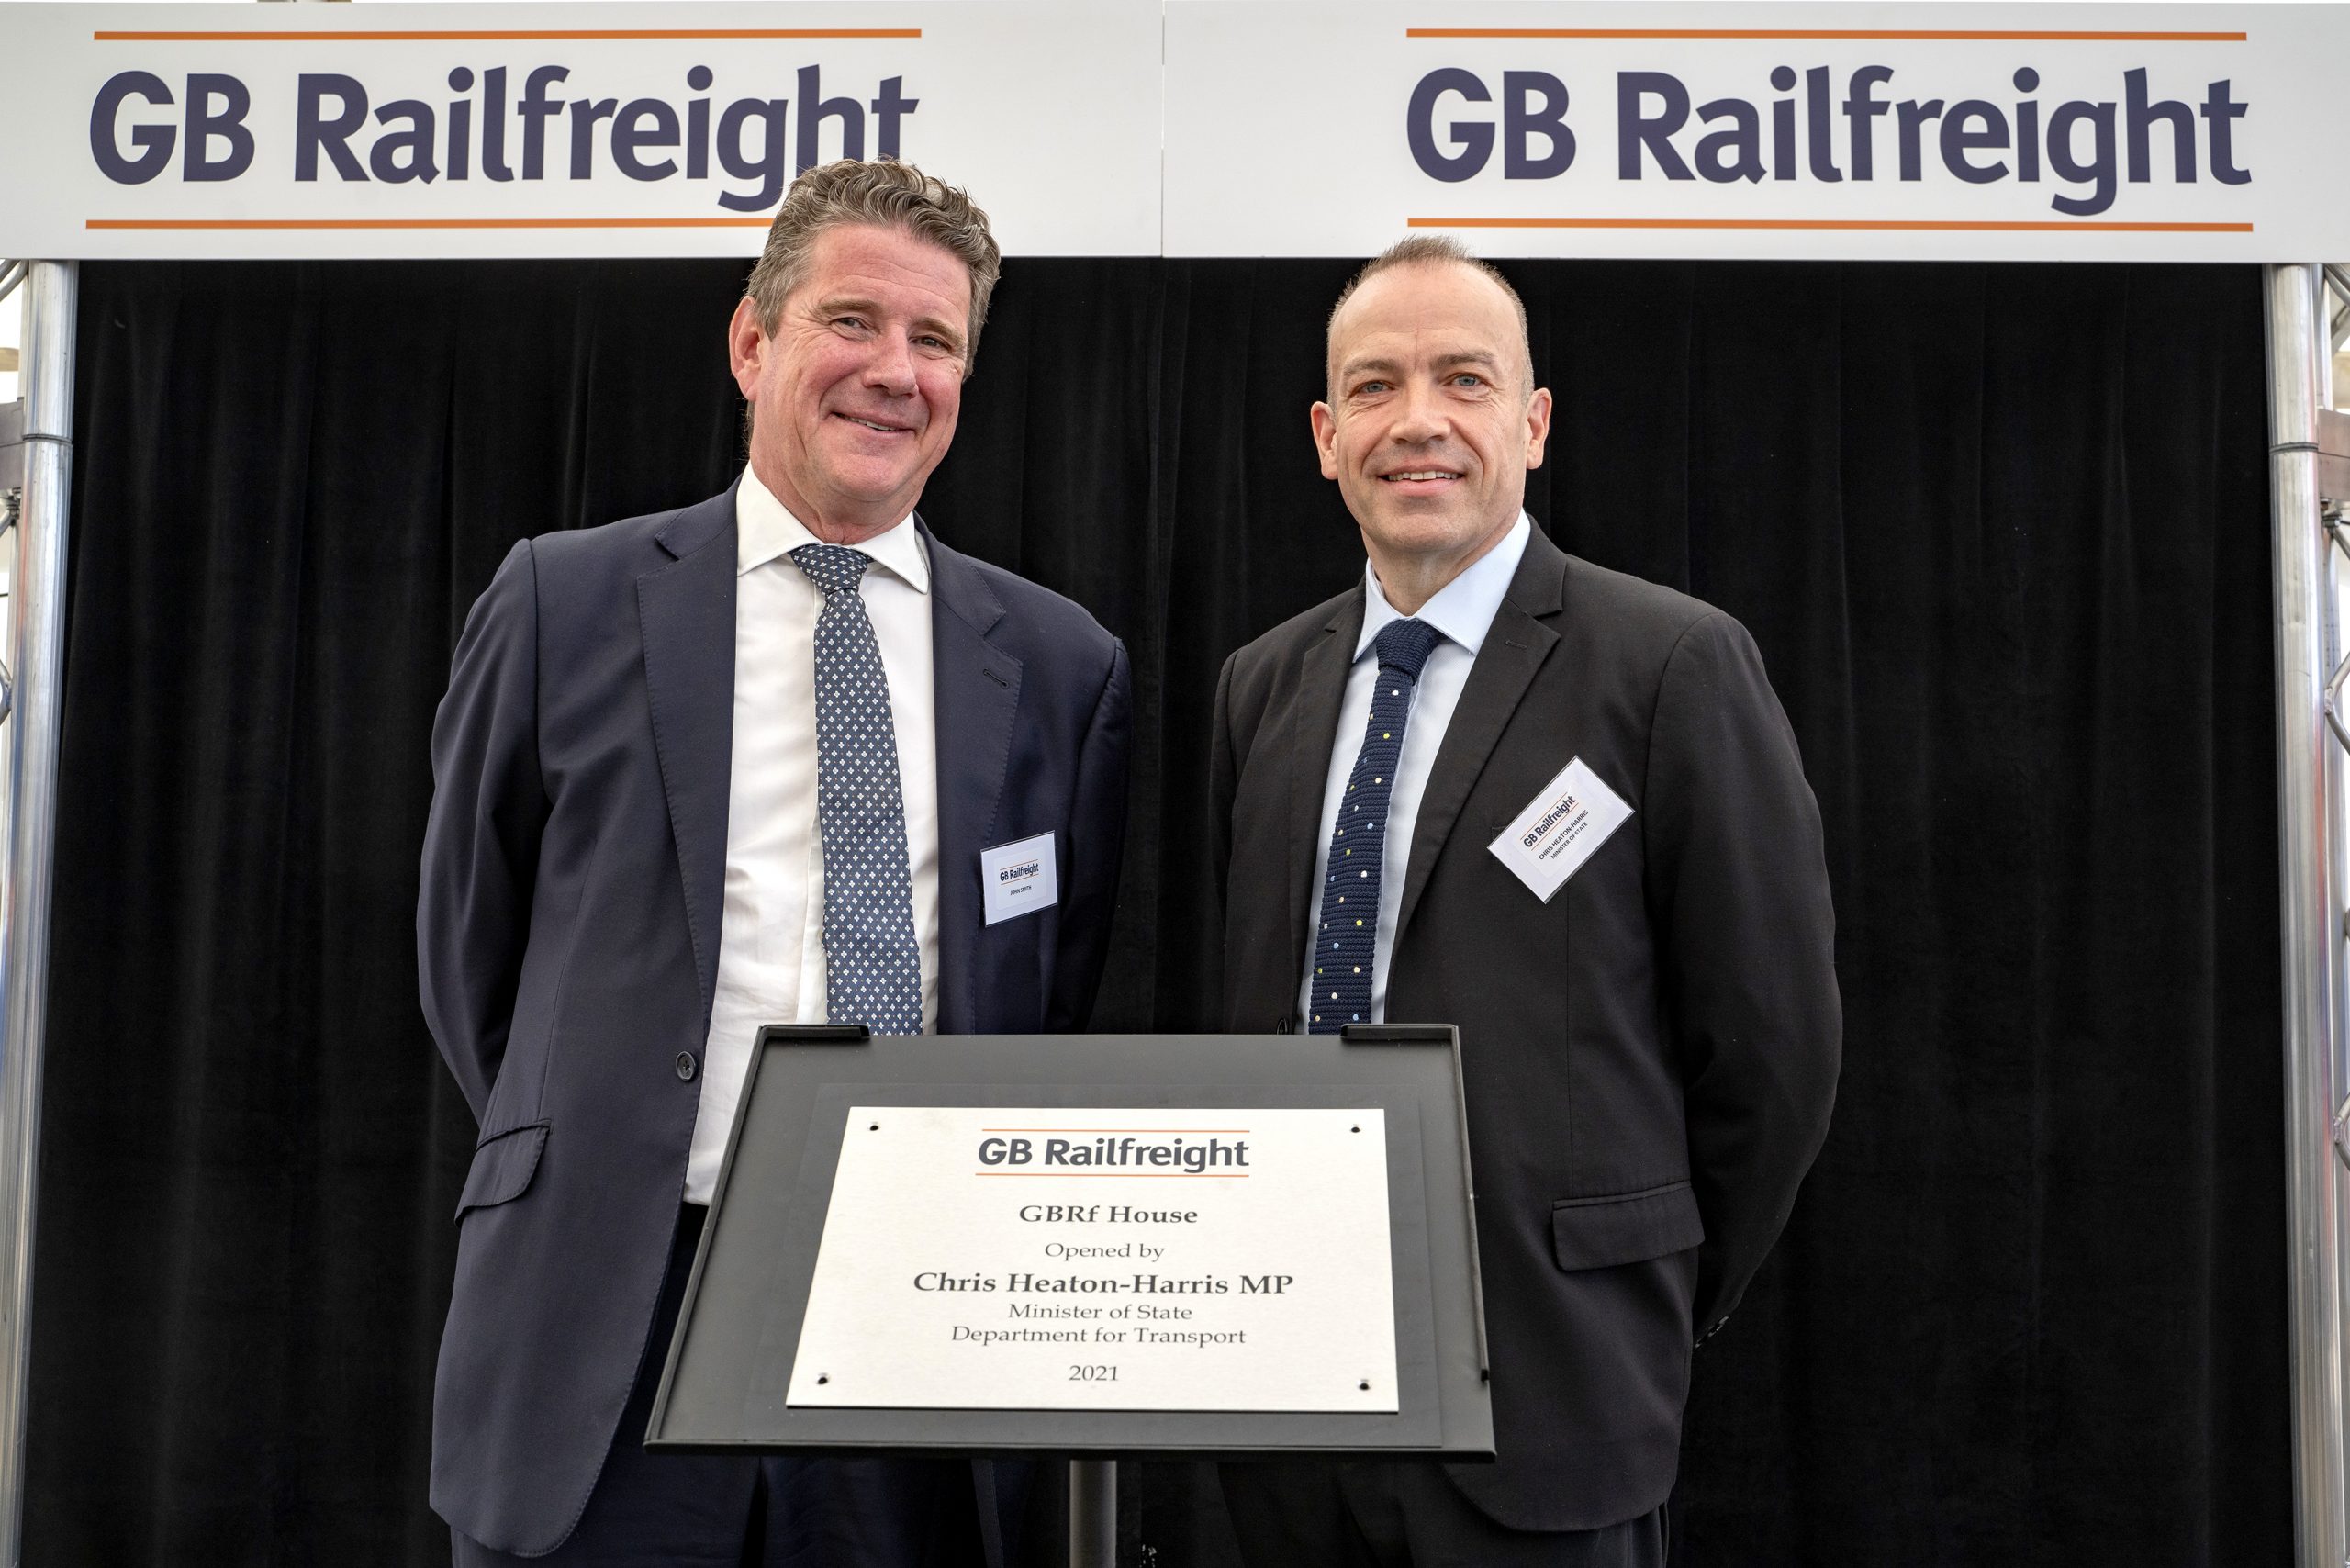 GB Railfreight’s regional investment continues with new Peterborough HQ, officially opened by Rail Minister